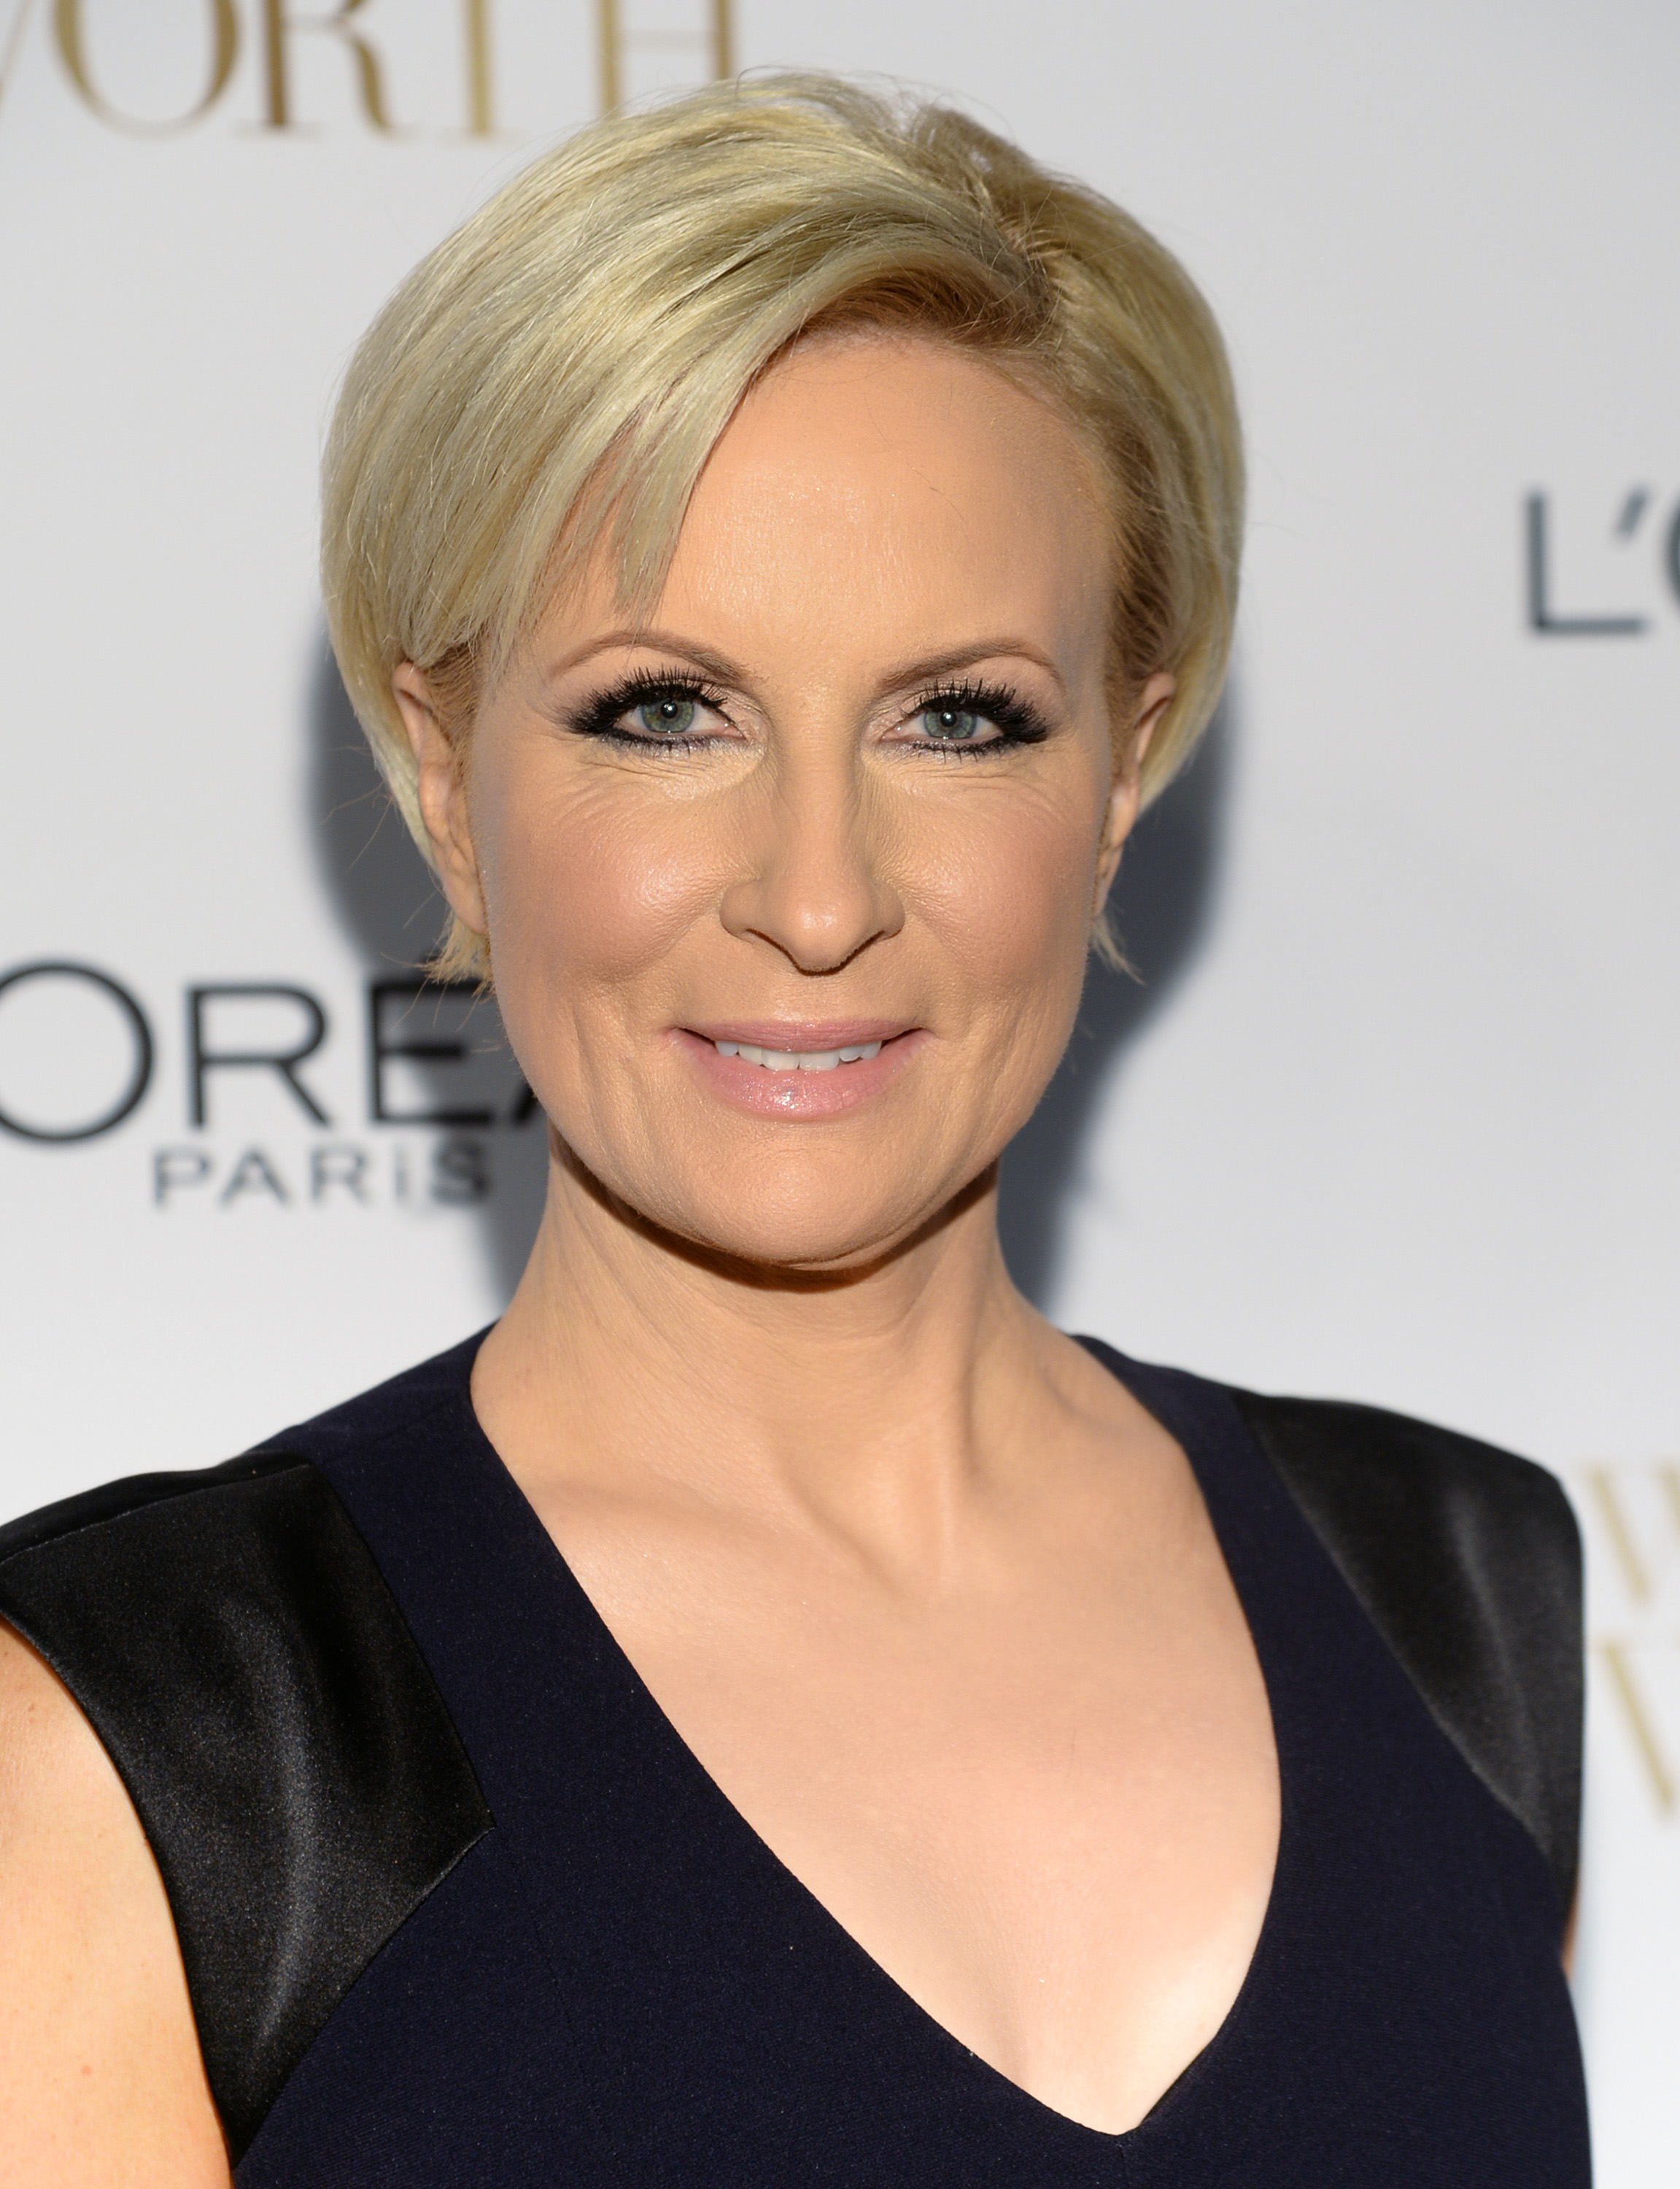 Mika Brzezinski arrives at the Ninth Annual Women of Worth Awards in New York City on Dec. 2, 2014.